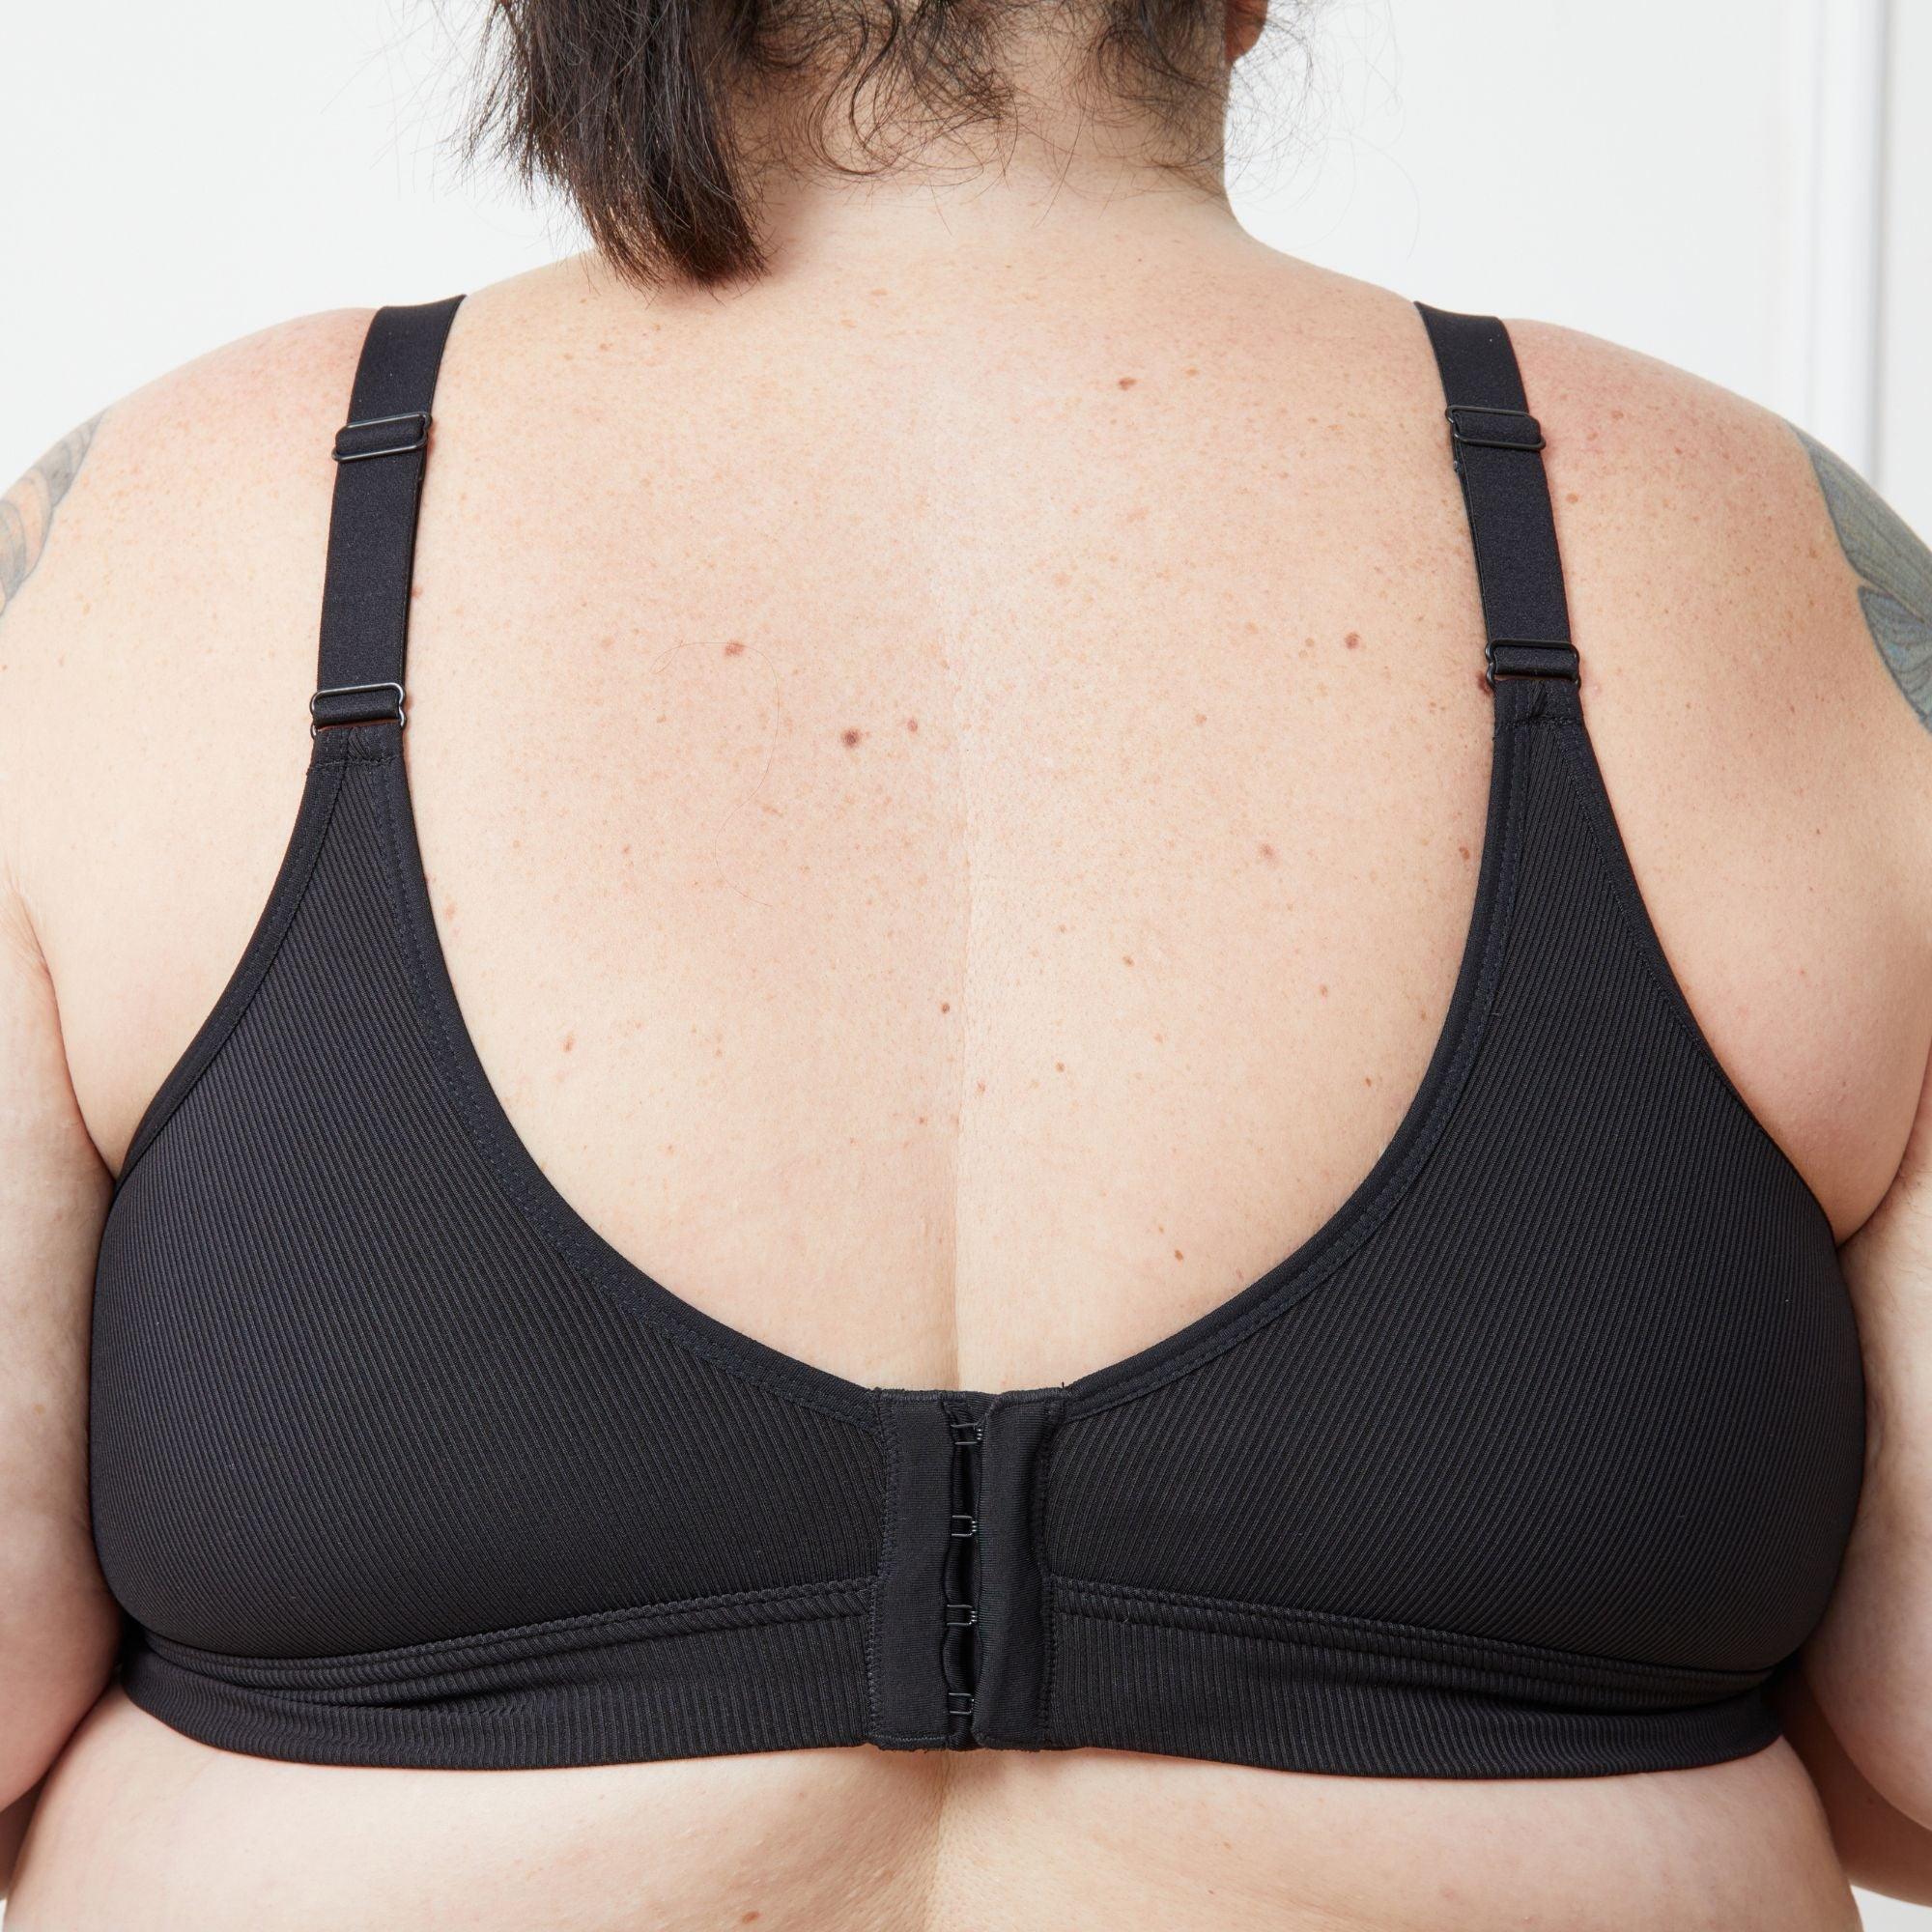 Explore More Options: Find Your Perfect Bra Fit Today!